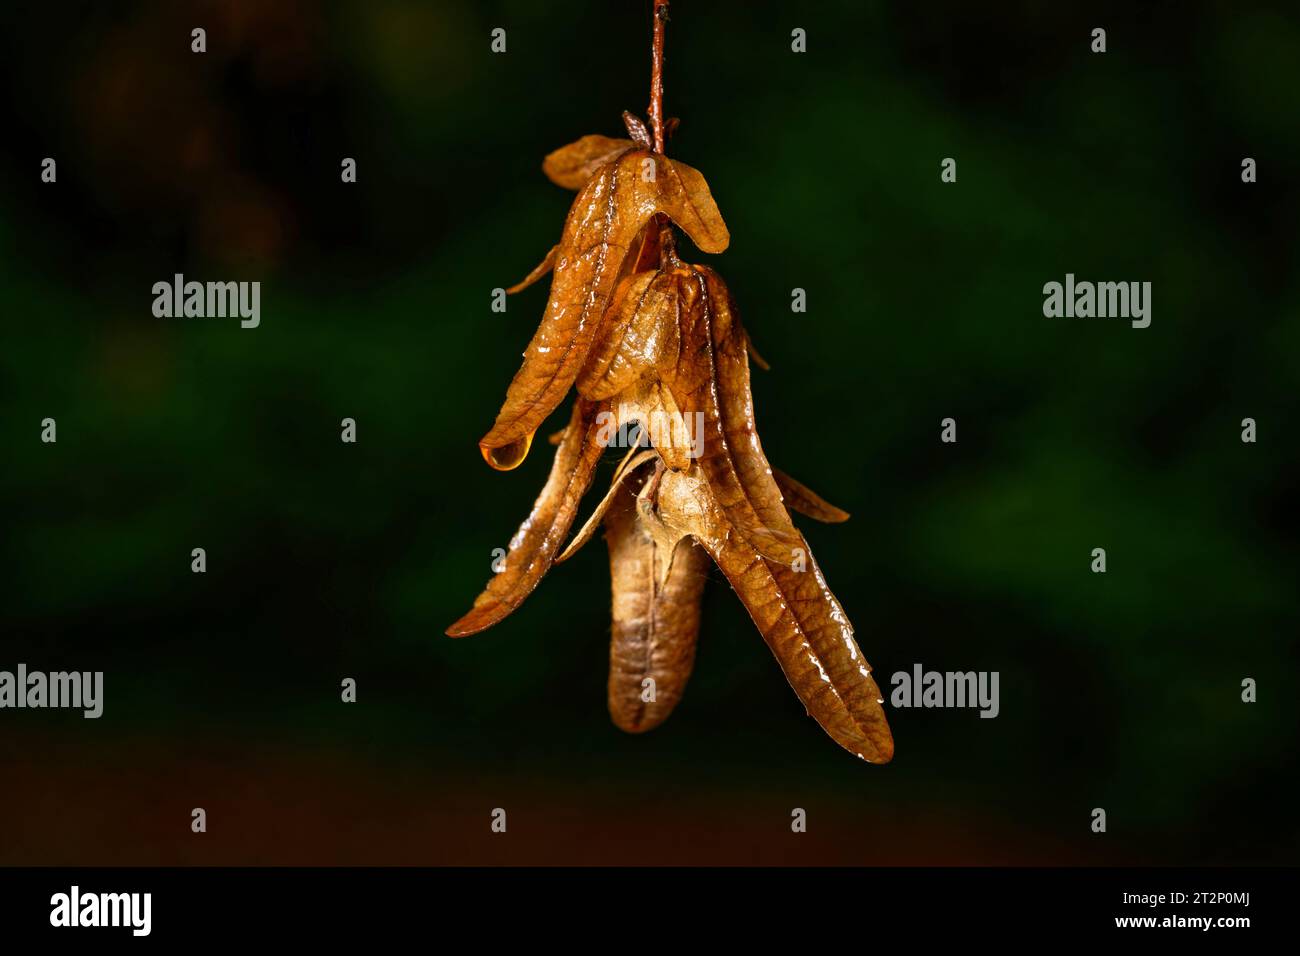 carpinus betulus brown fruits of hornbeam hanging in front of dark background in autumn after a rain shower Stock Photo